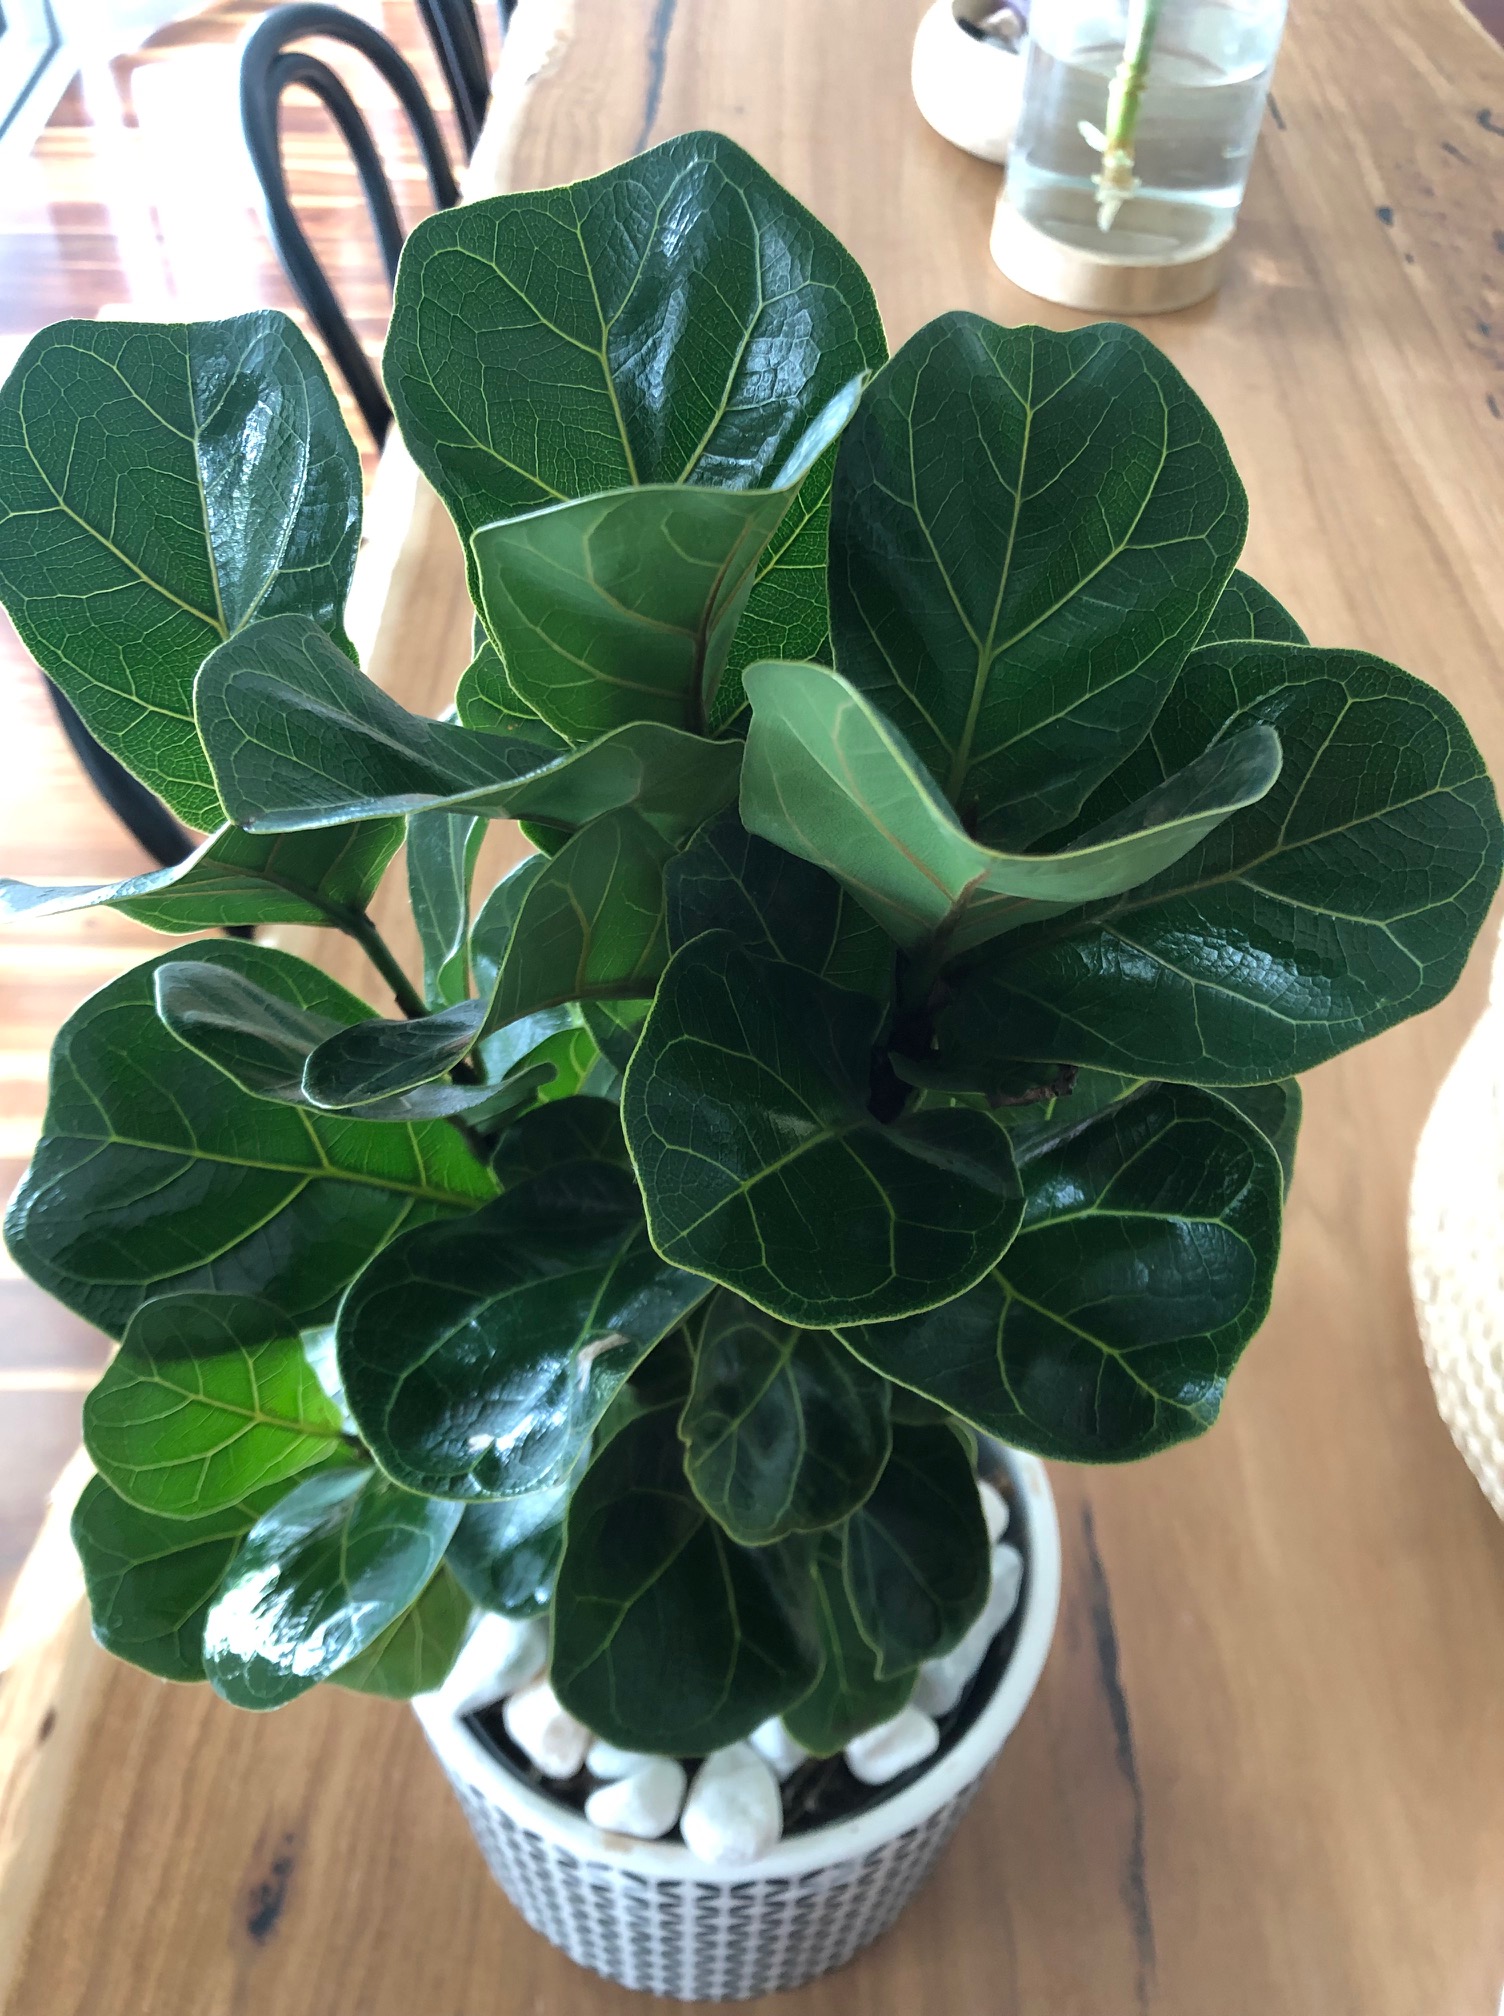 Polish the leaves on your indoor plants